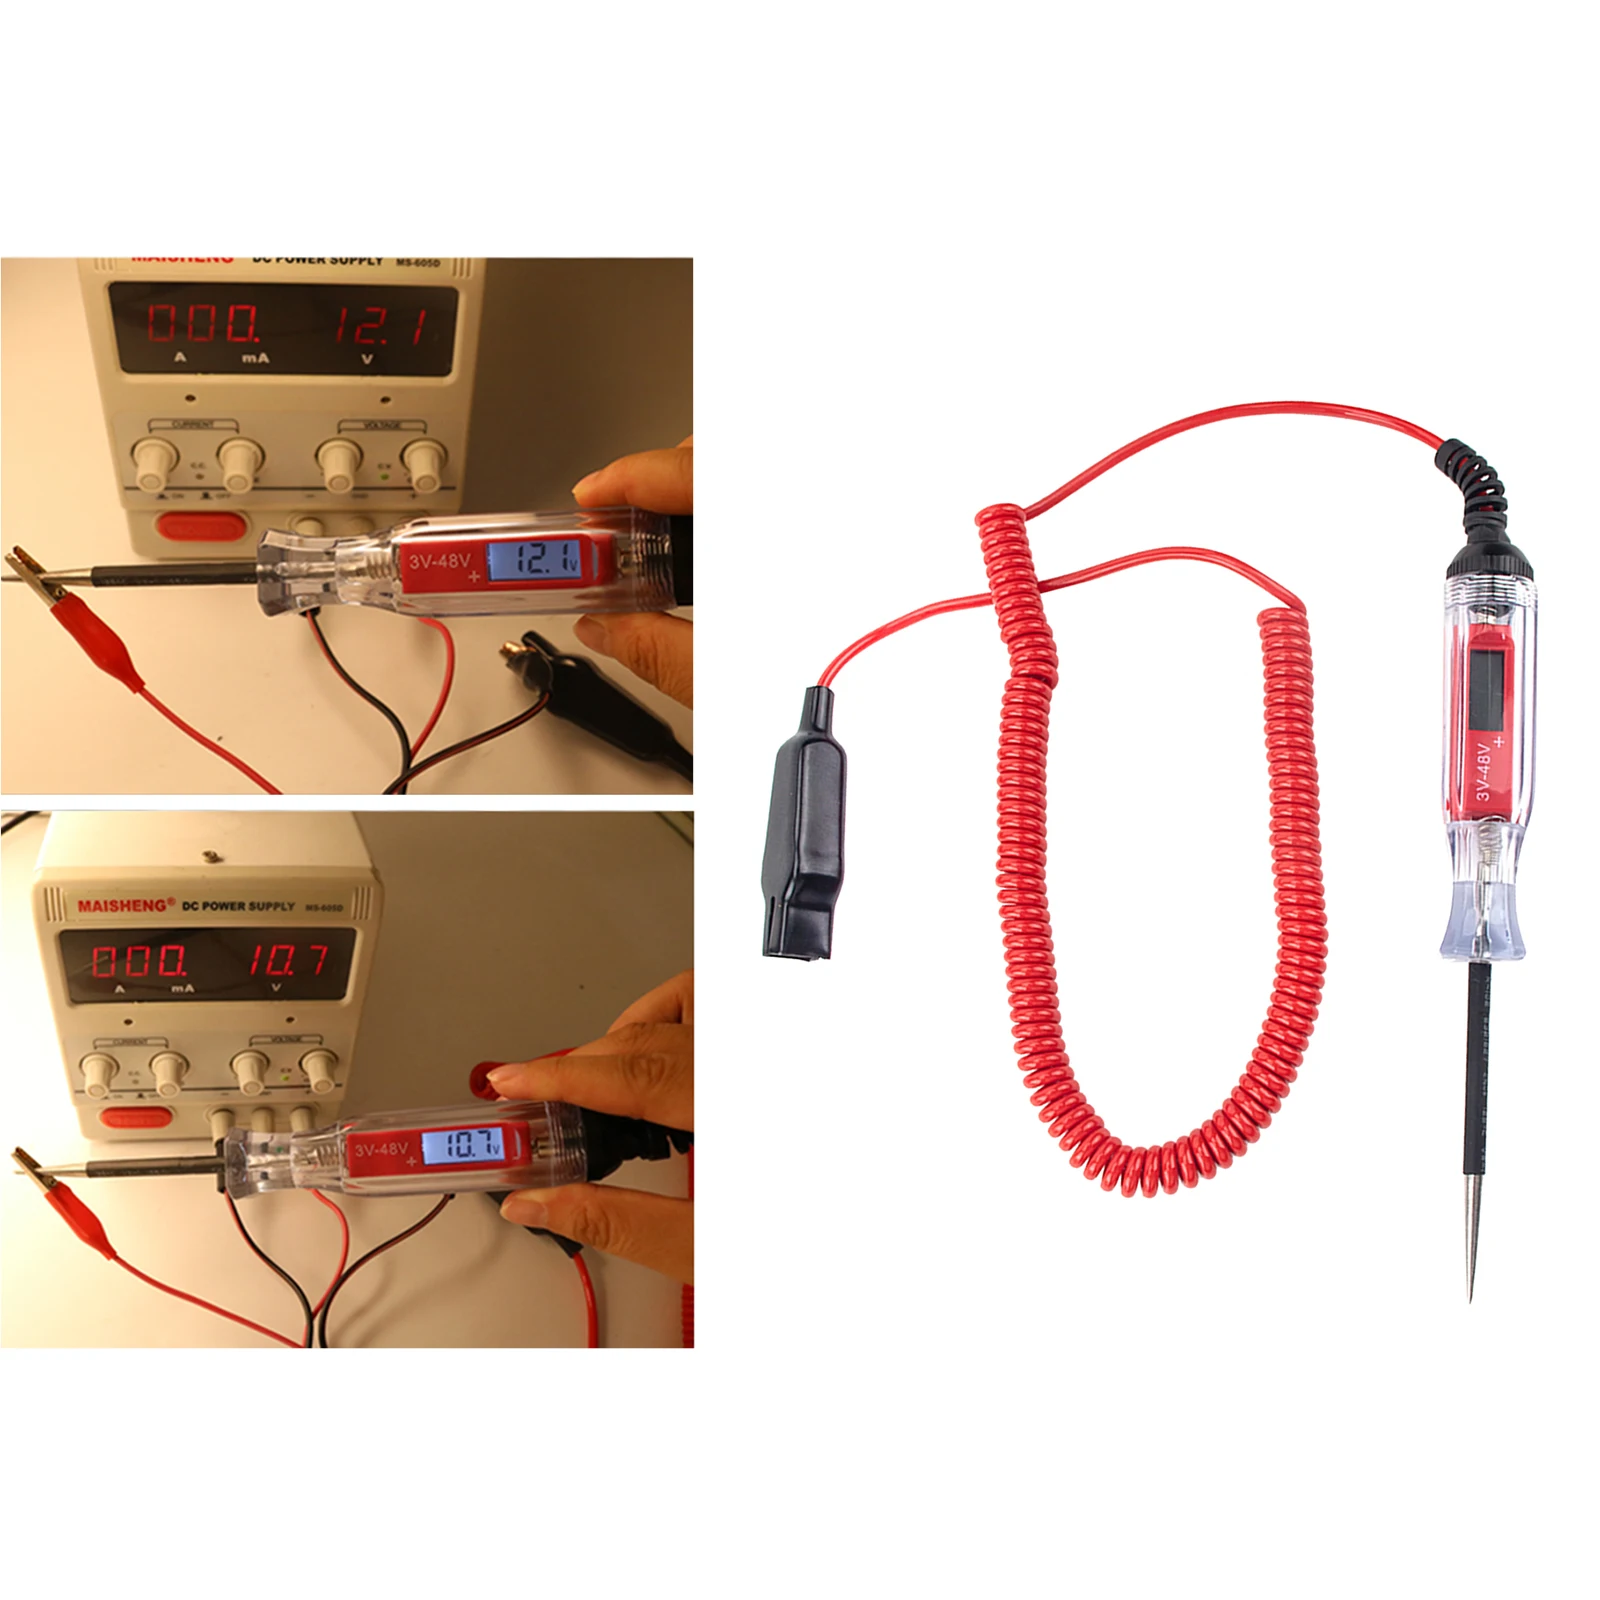 3-48V Auto Electric Circuit Tester Car Automotive with Stainless Probe